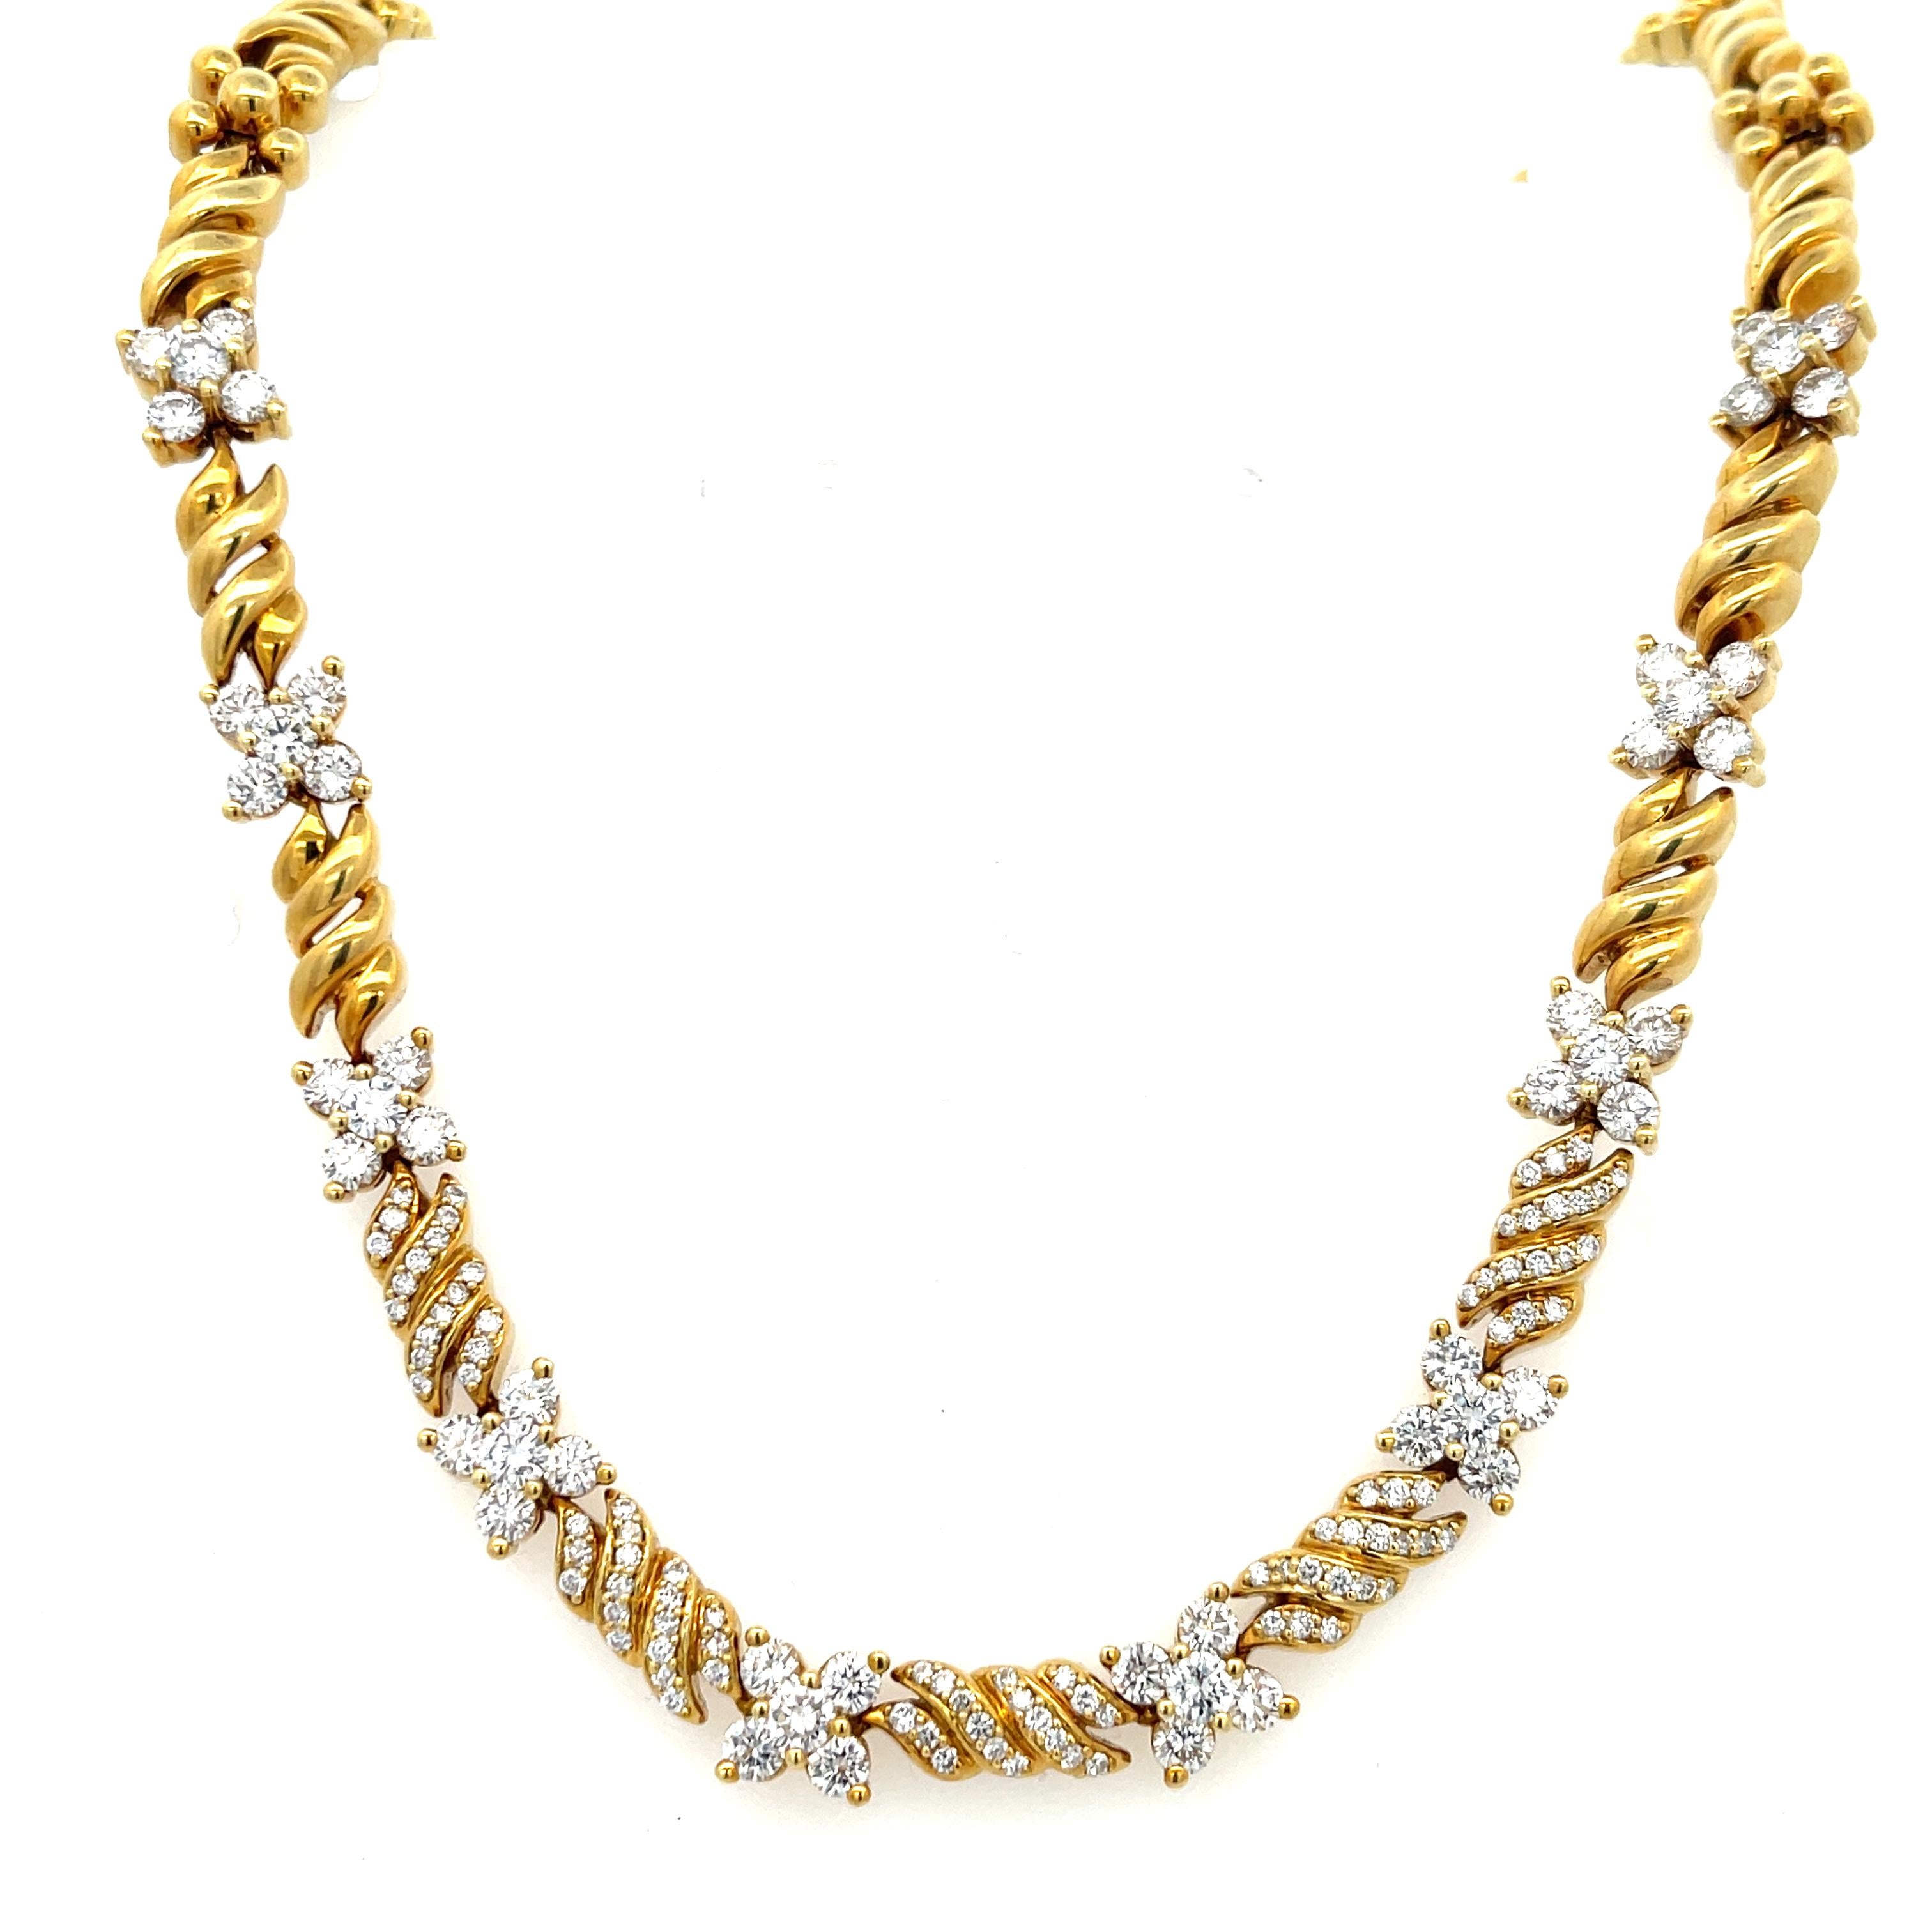 Jose Hess Floret Diamond Necklace in 18K Yellow Gold. The necklace features 6.50ctw of brilliant round diamonds, F in color, VS in clarity. The necklace is 16 inches in length, 3/8 inches wide, and weighs 70.5 grams. Has a hidden clasp and figure 8